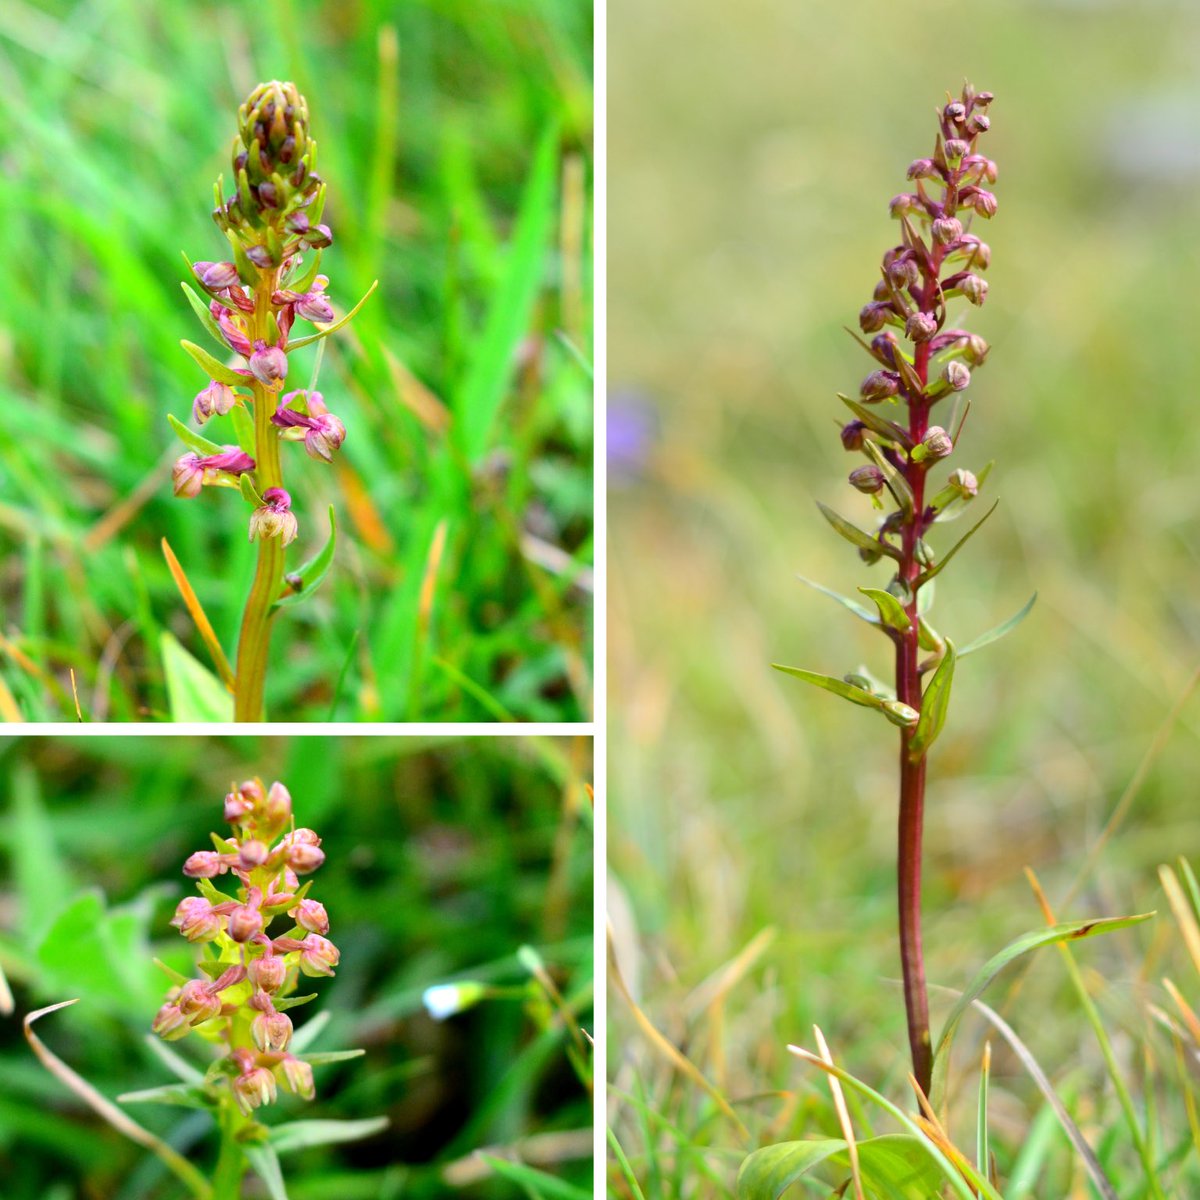 Frog orchids have had a growth spurt with recent rains ⁦@ukorchids⁩ ⁦@BSBIbotany⁩ #SouthCumbria